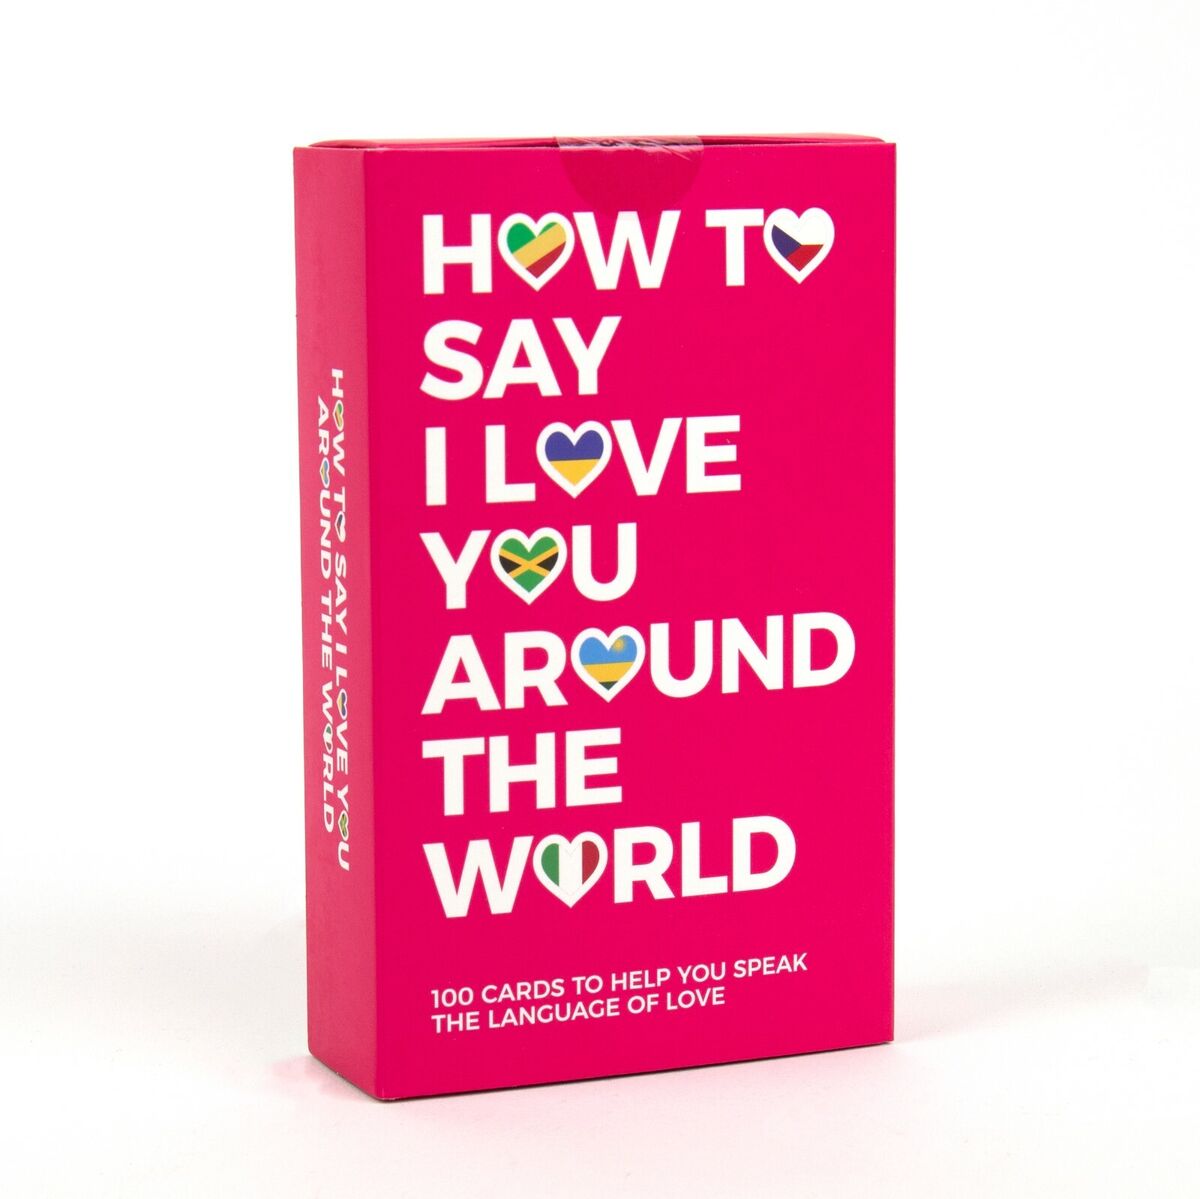 How to Say I Love You Around The World